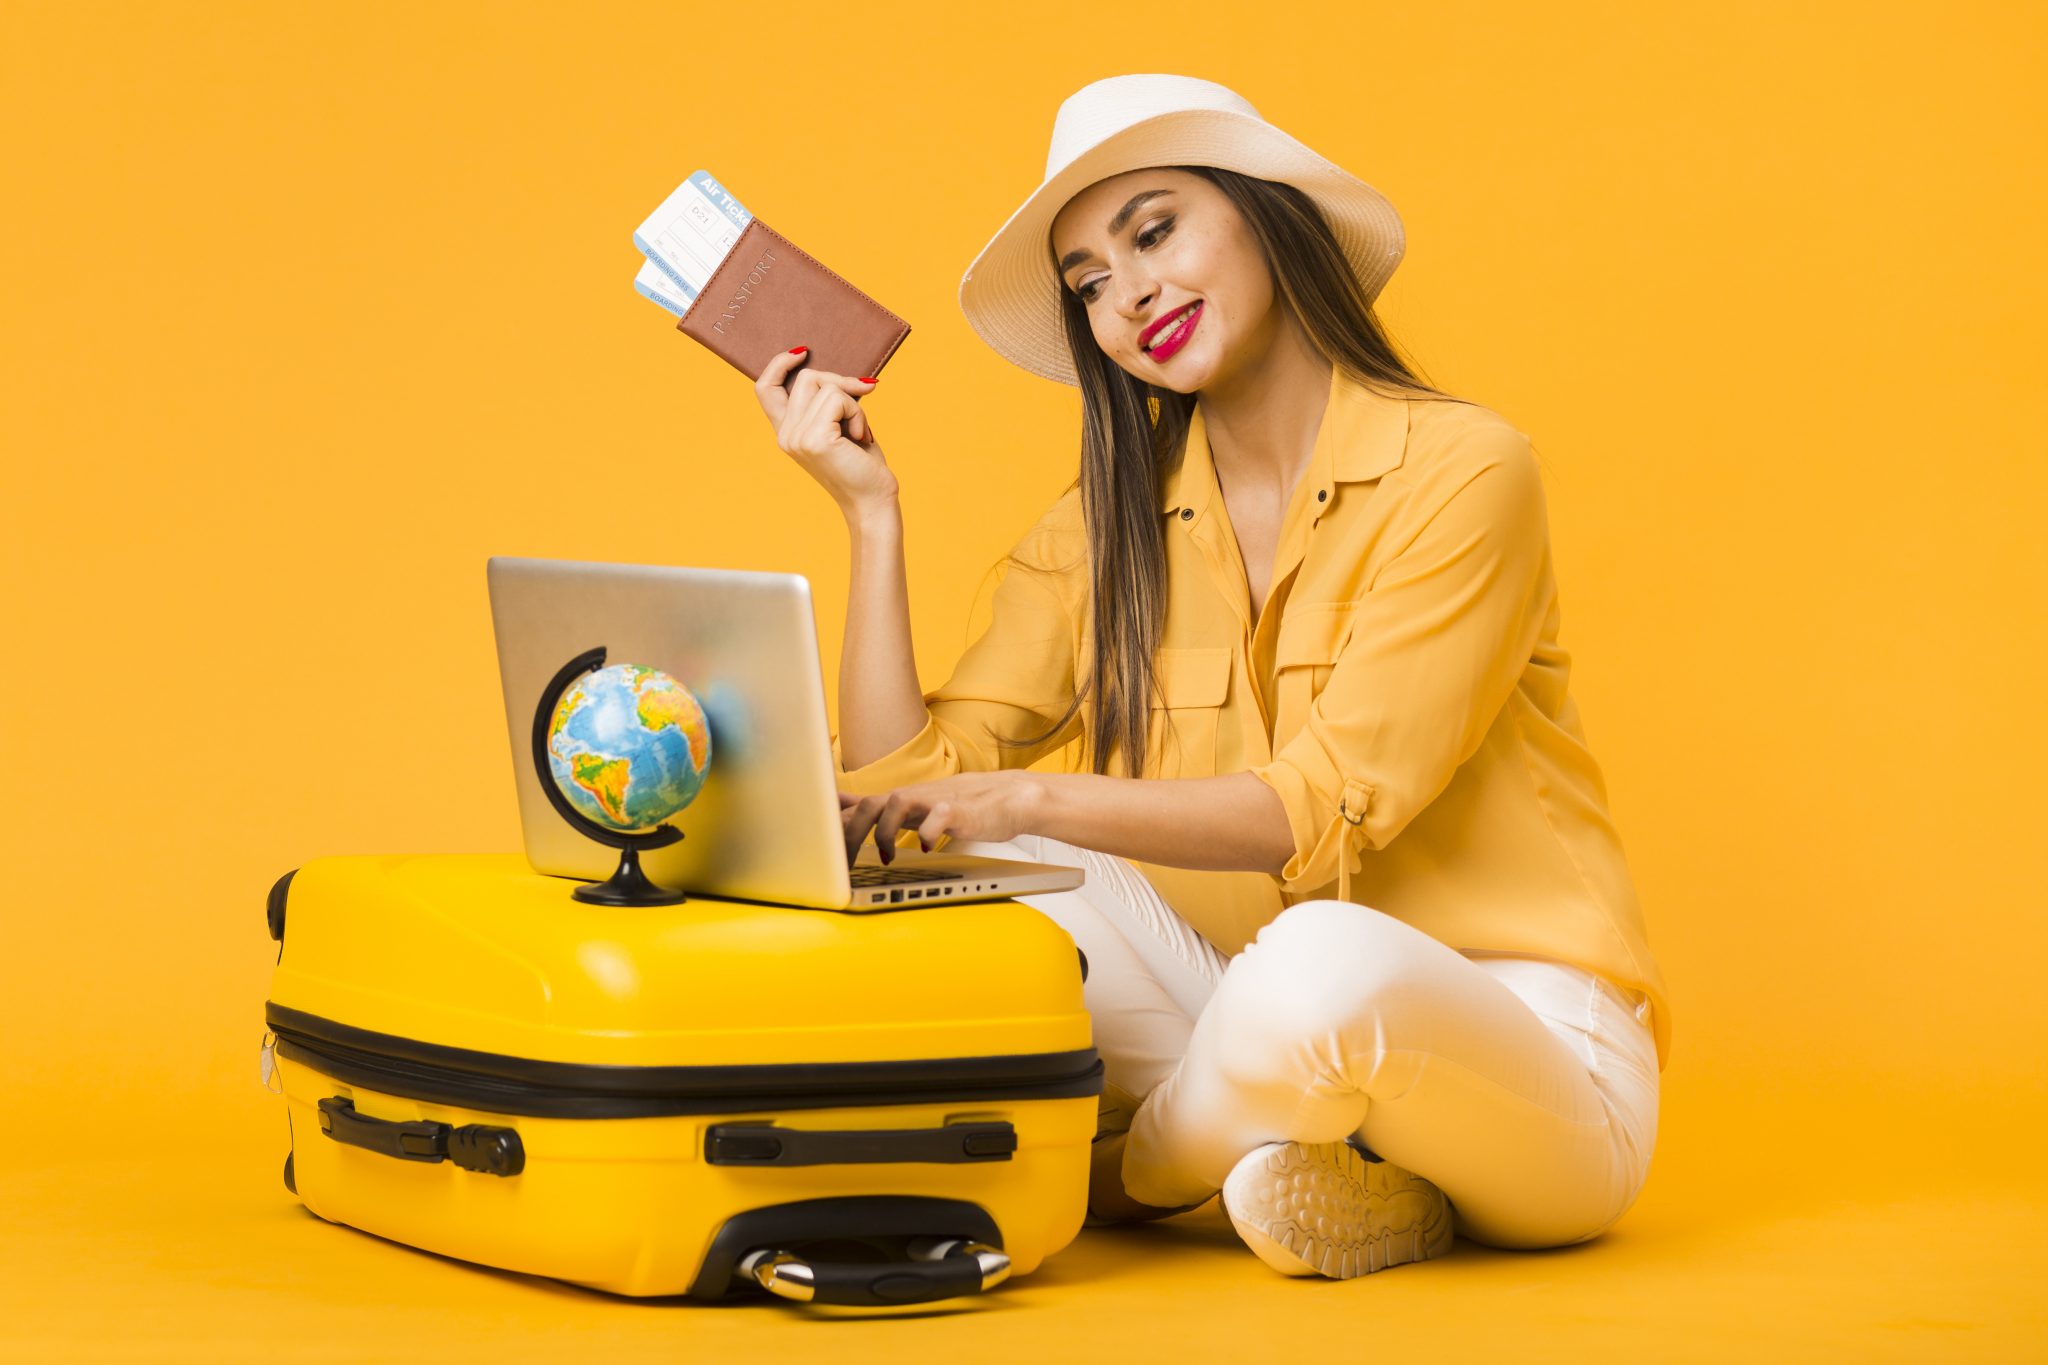  A woman wearing a summer hat and holding a passport and plane tickets is sitting on a yellow suitcase while using a laptop with a globe on it.